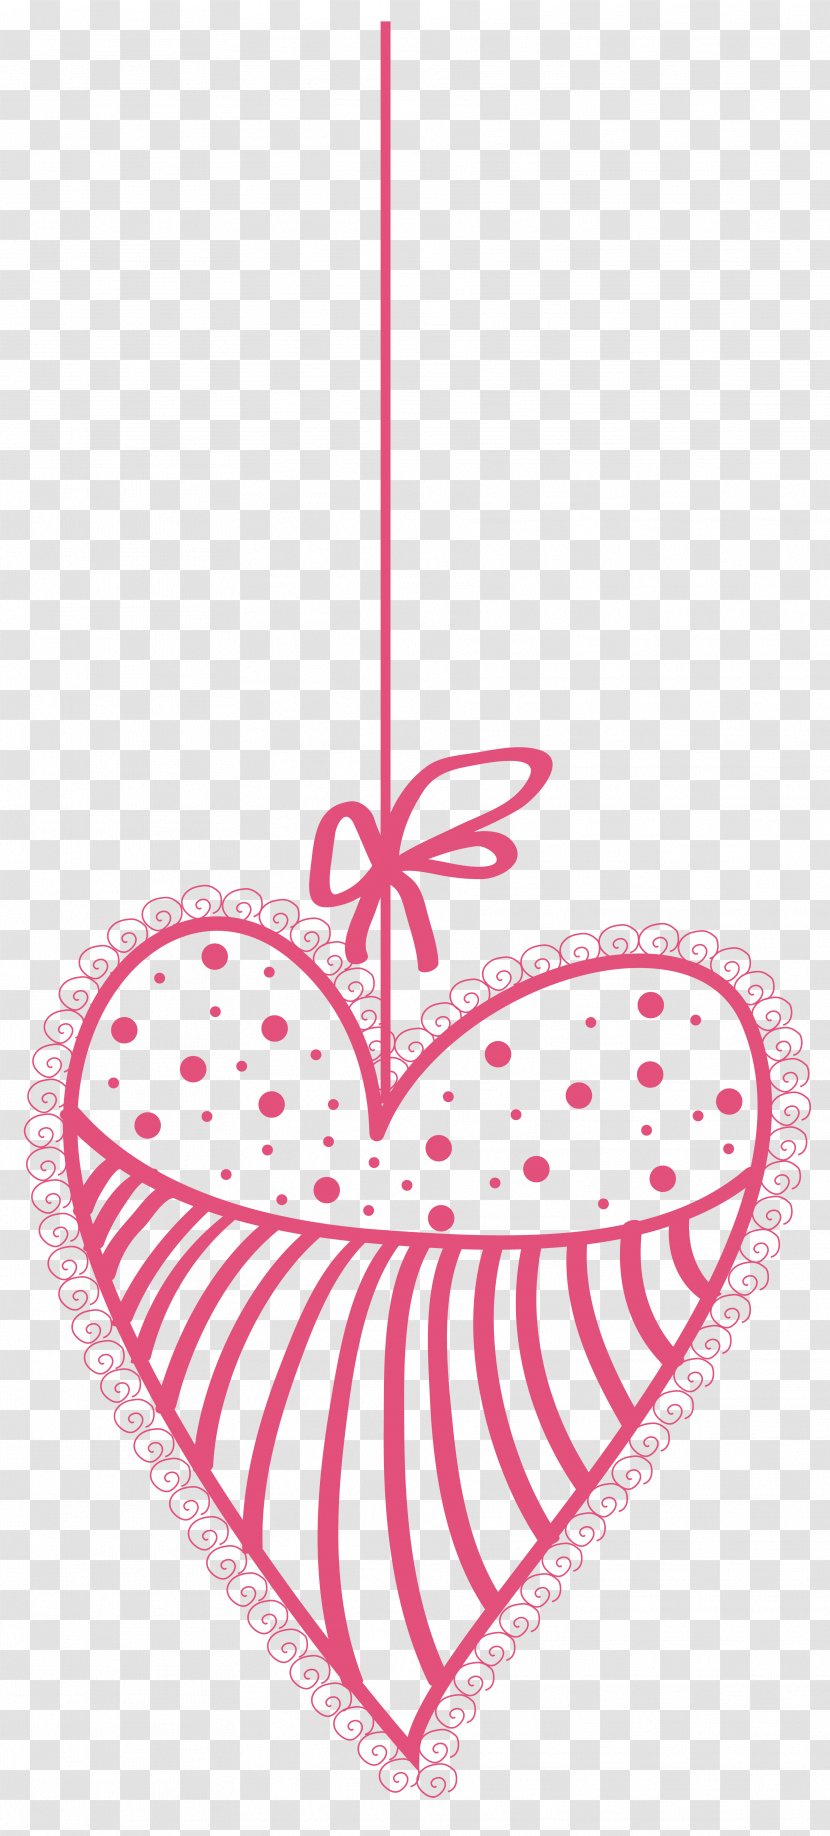 Heart Valentine's Day Love Clip Art - Cartoon - PINK HEARTS Transparent PNG